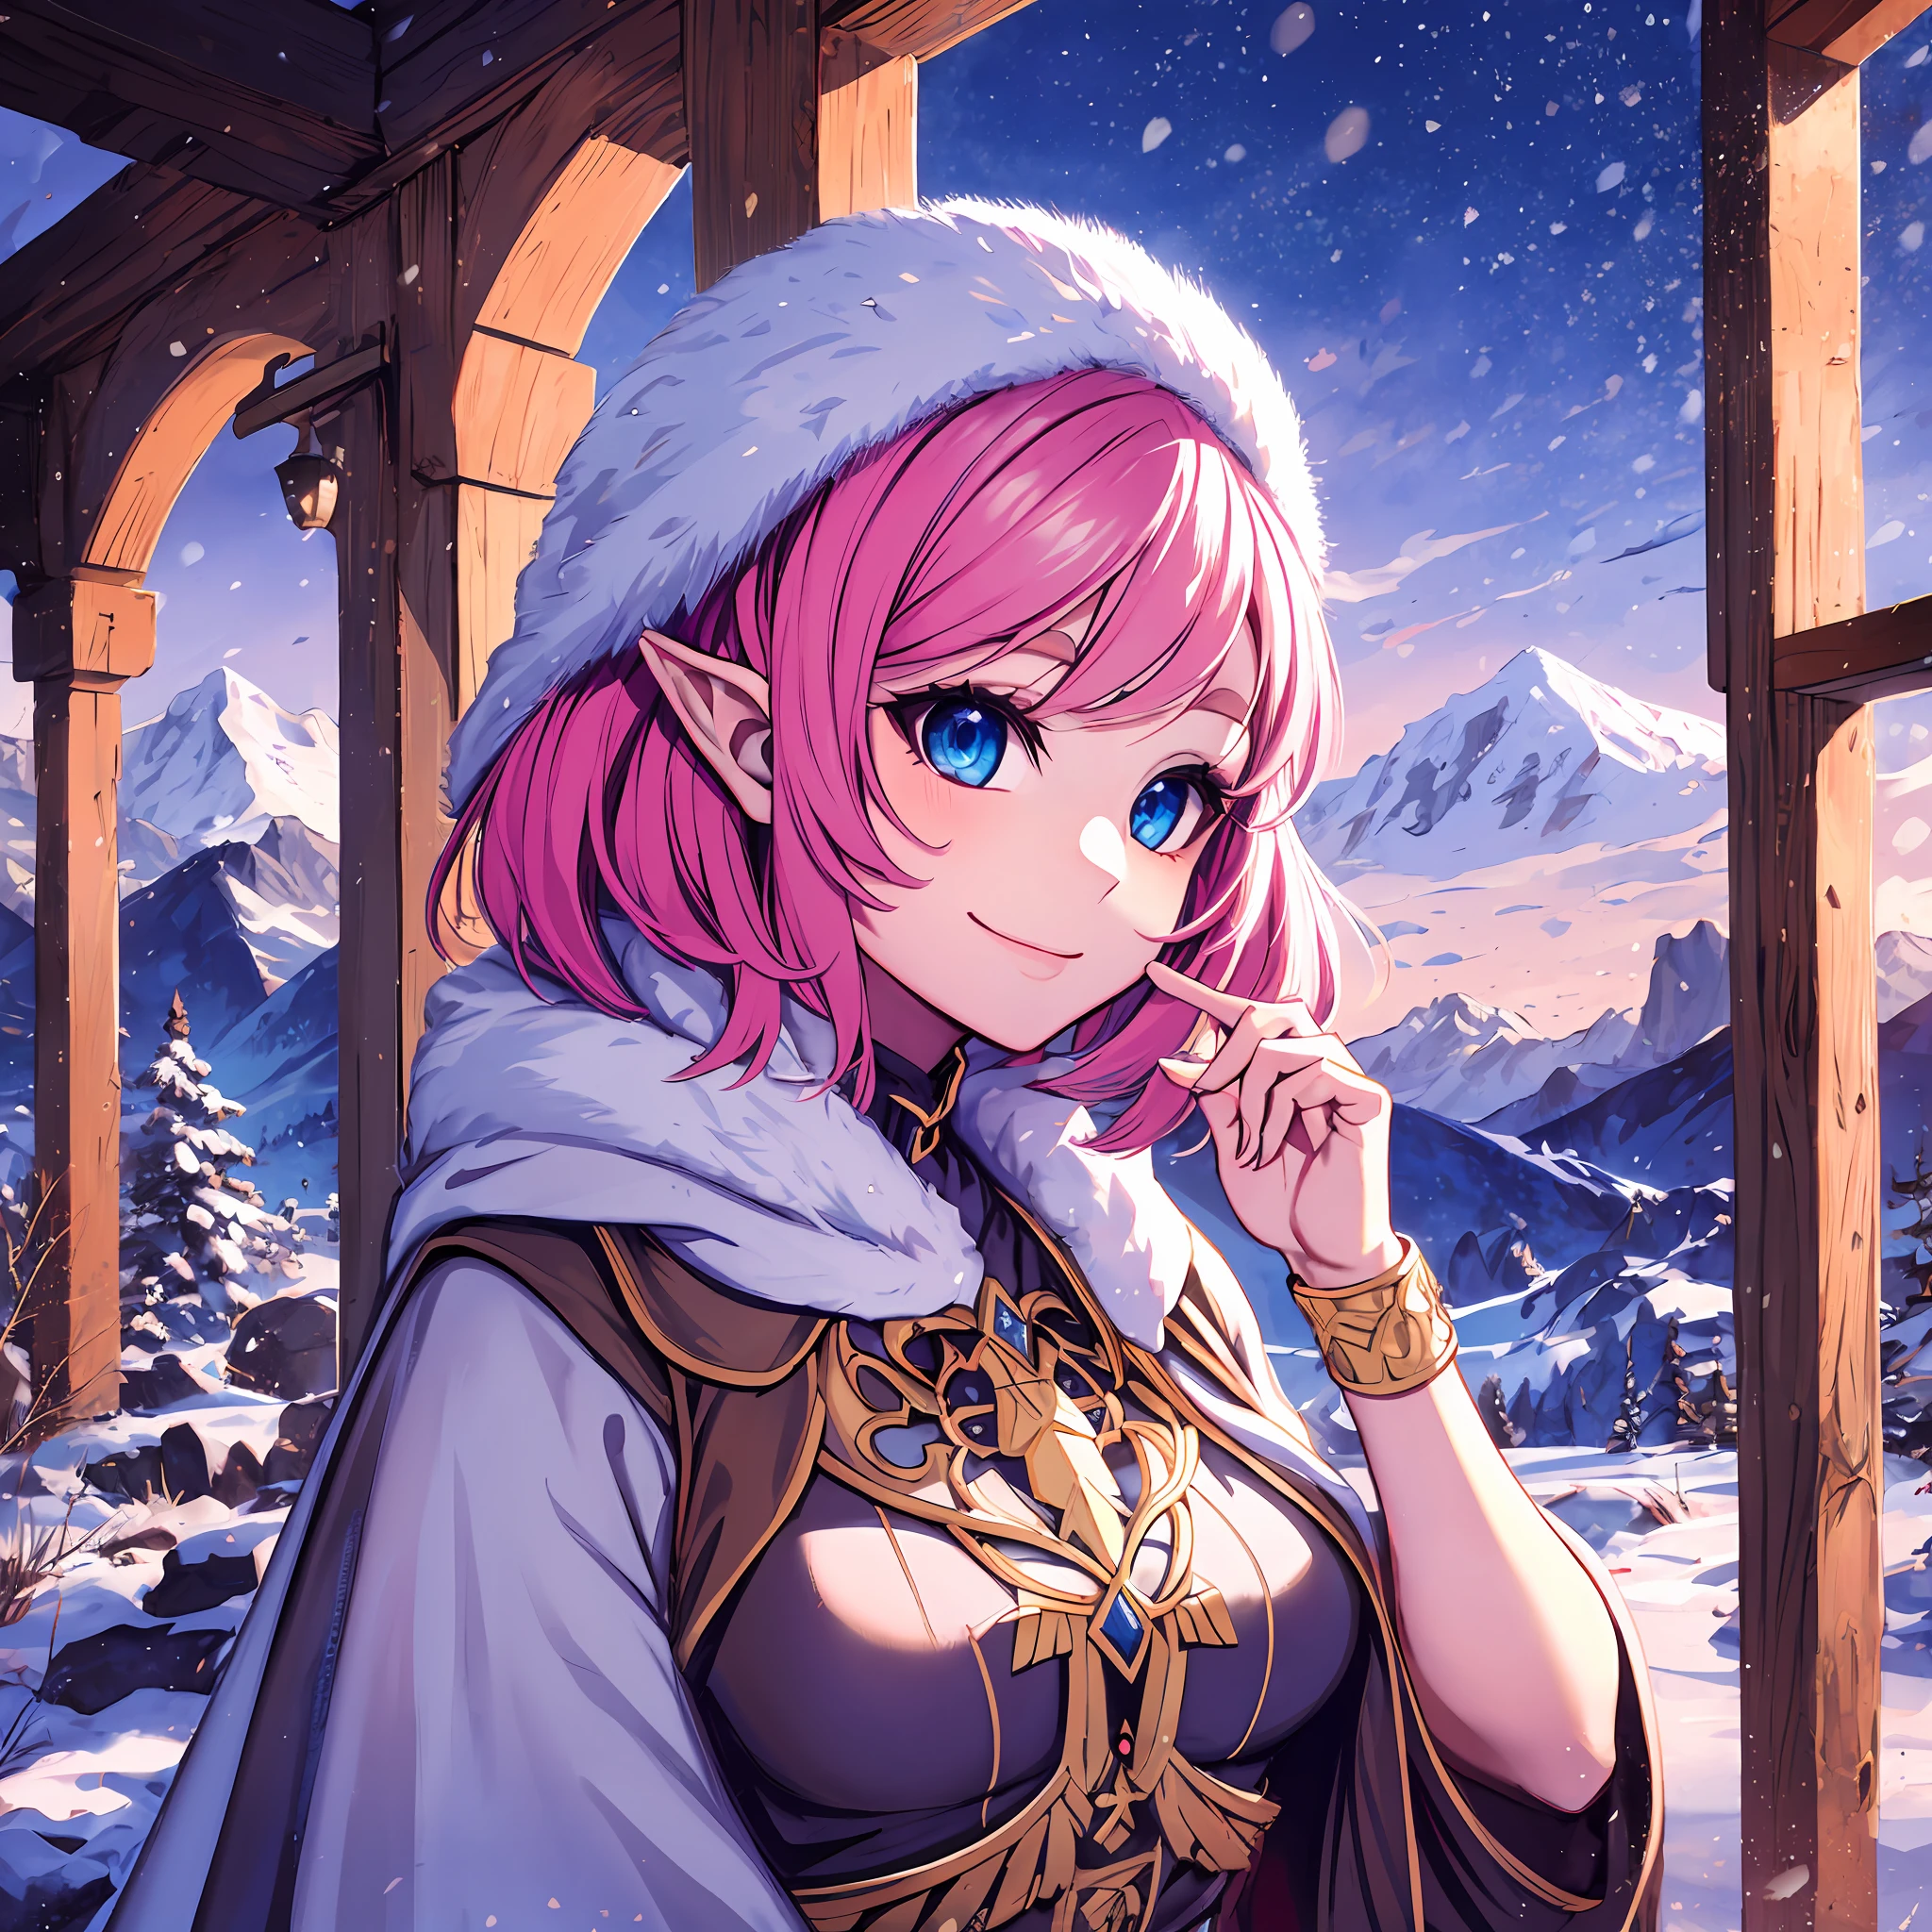 Make it an anime，（nmasterpiece，top Quority，top-quality，offcial art，Beauty and aesthetics：1.2），ighly detailed，s fractal art，best detailed，Zentangle，（Snowy mountains in the background：1.5）（1 Elf Girl），（A pink-haired，Shoot hair，bobhair:1.7），（Shining eyes），(Enchanted)，（White cloak）,（Ski Wear）,A smile,lighting on the face